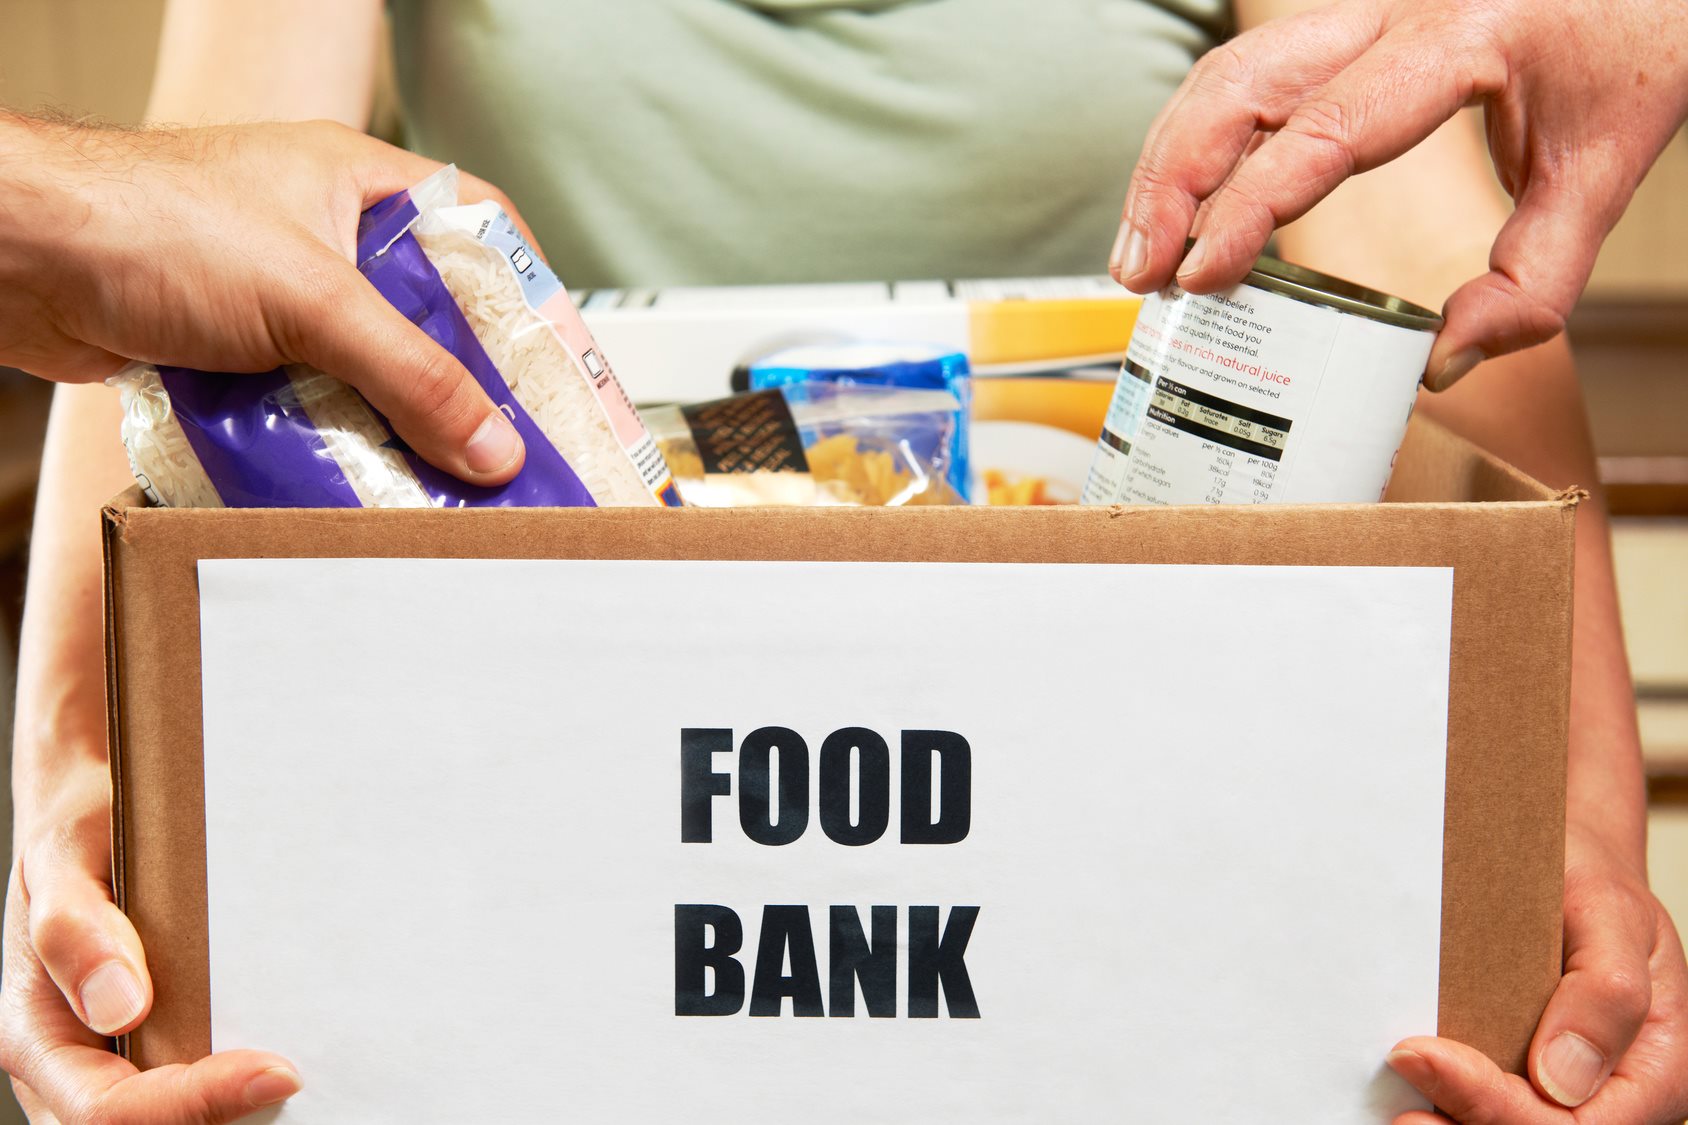 Can Organizations Really Get Sued over Donating Food?